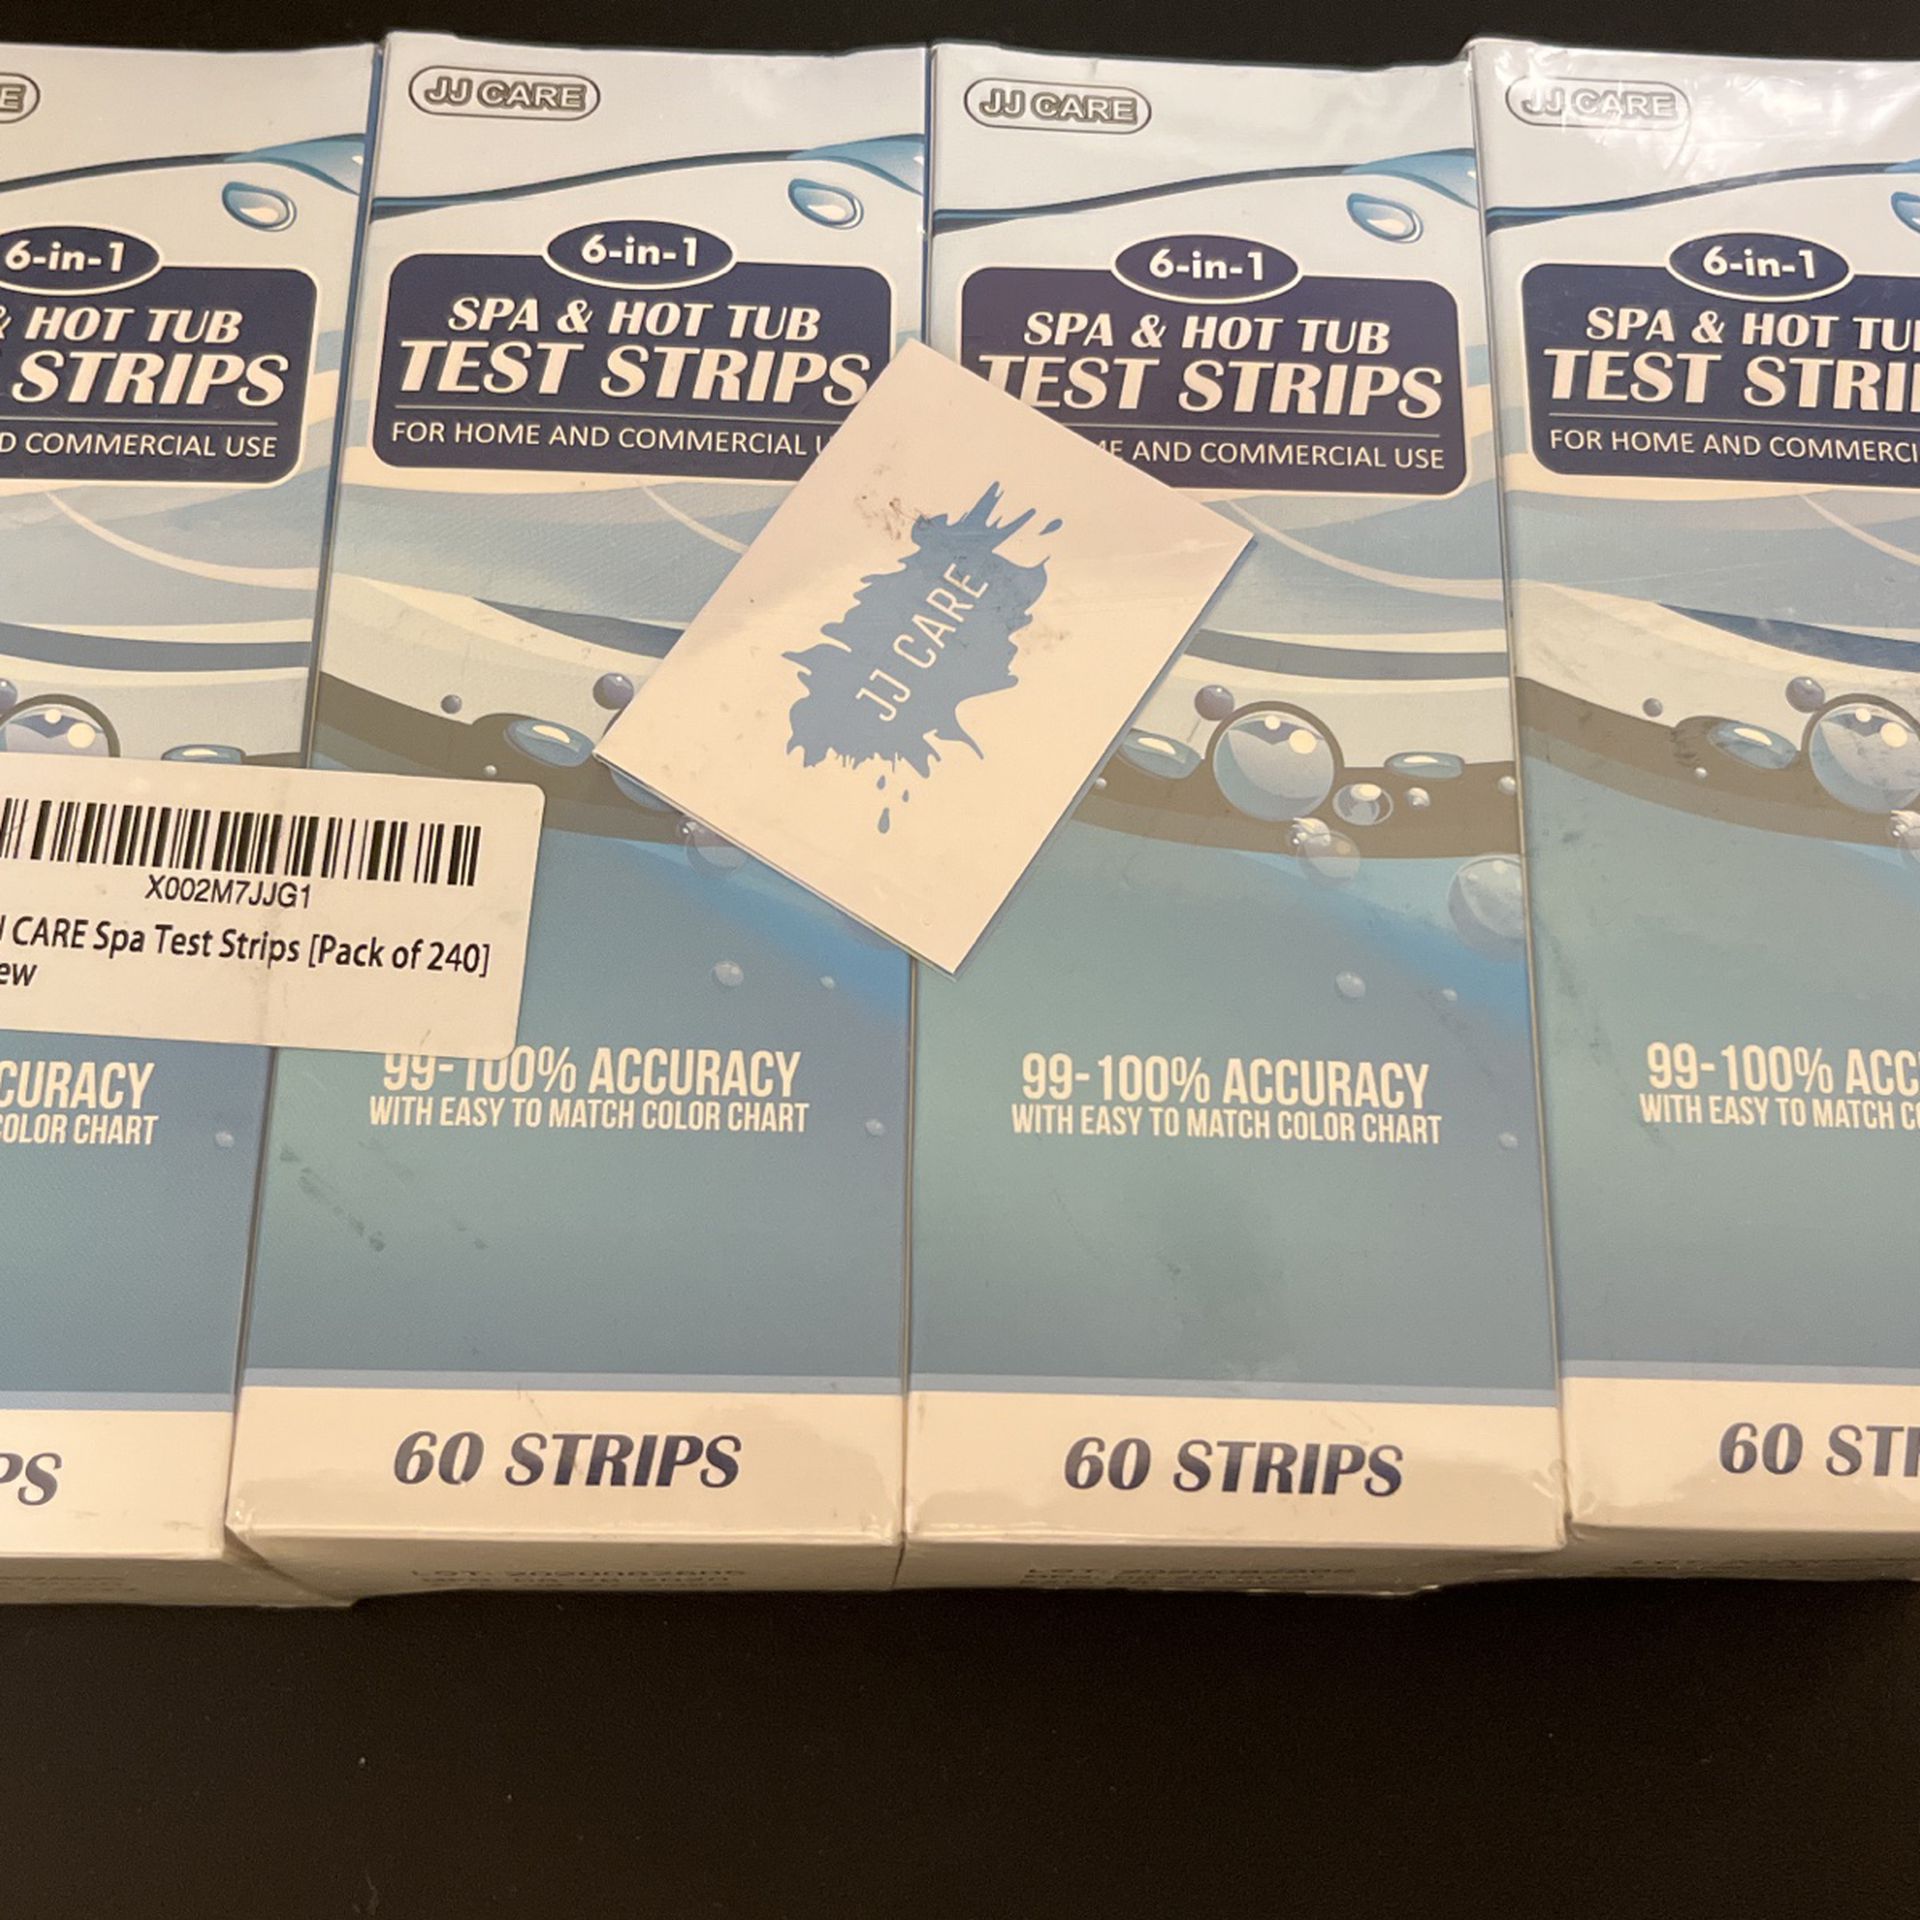 JJ Care 6-in-1 Spa & Hot Tub Test Strips (480 ct) Expires August 2022